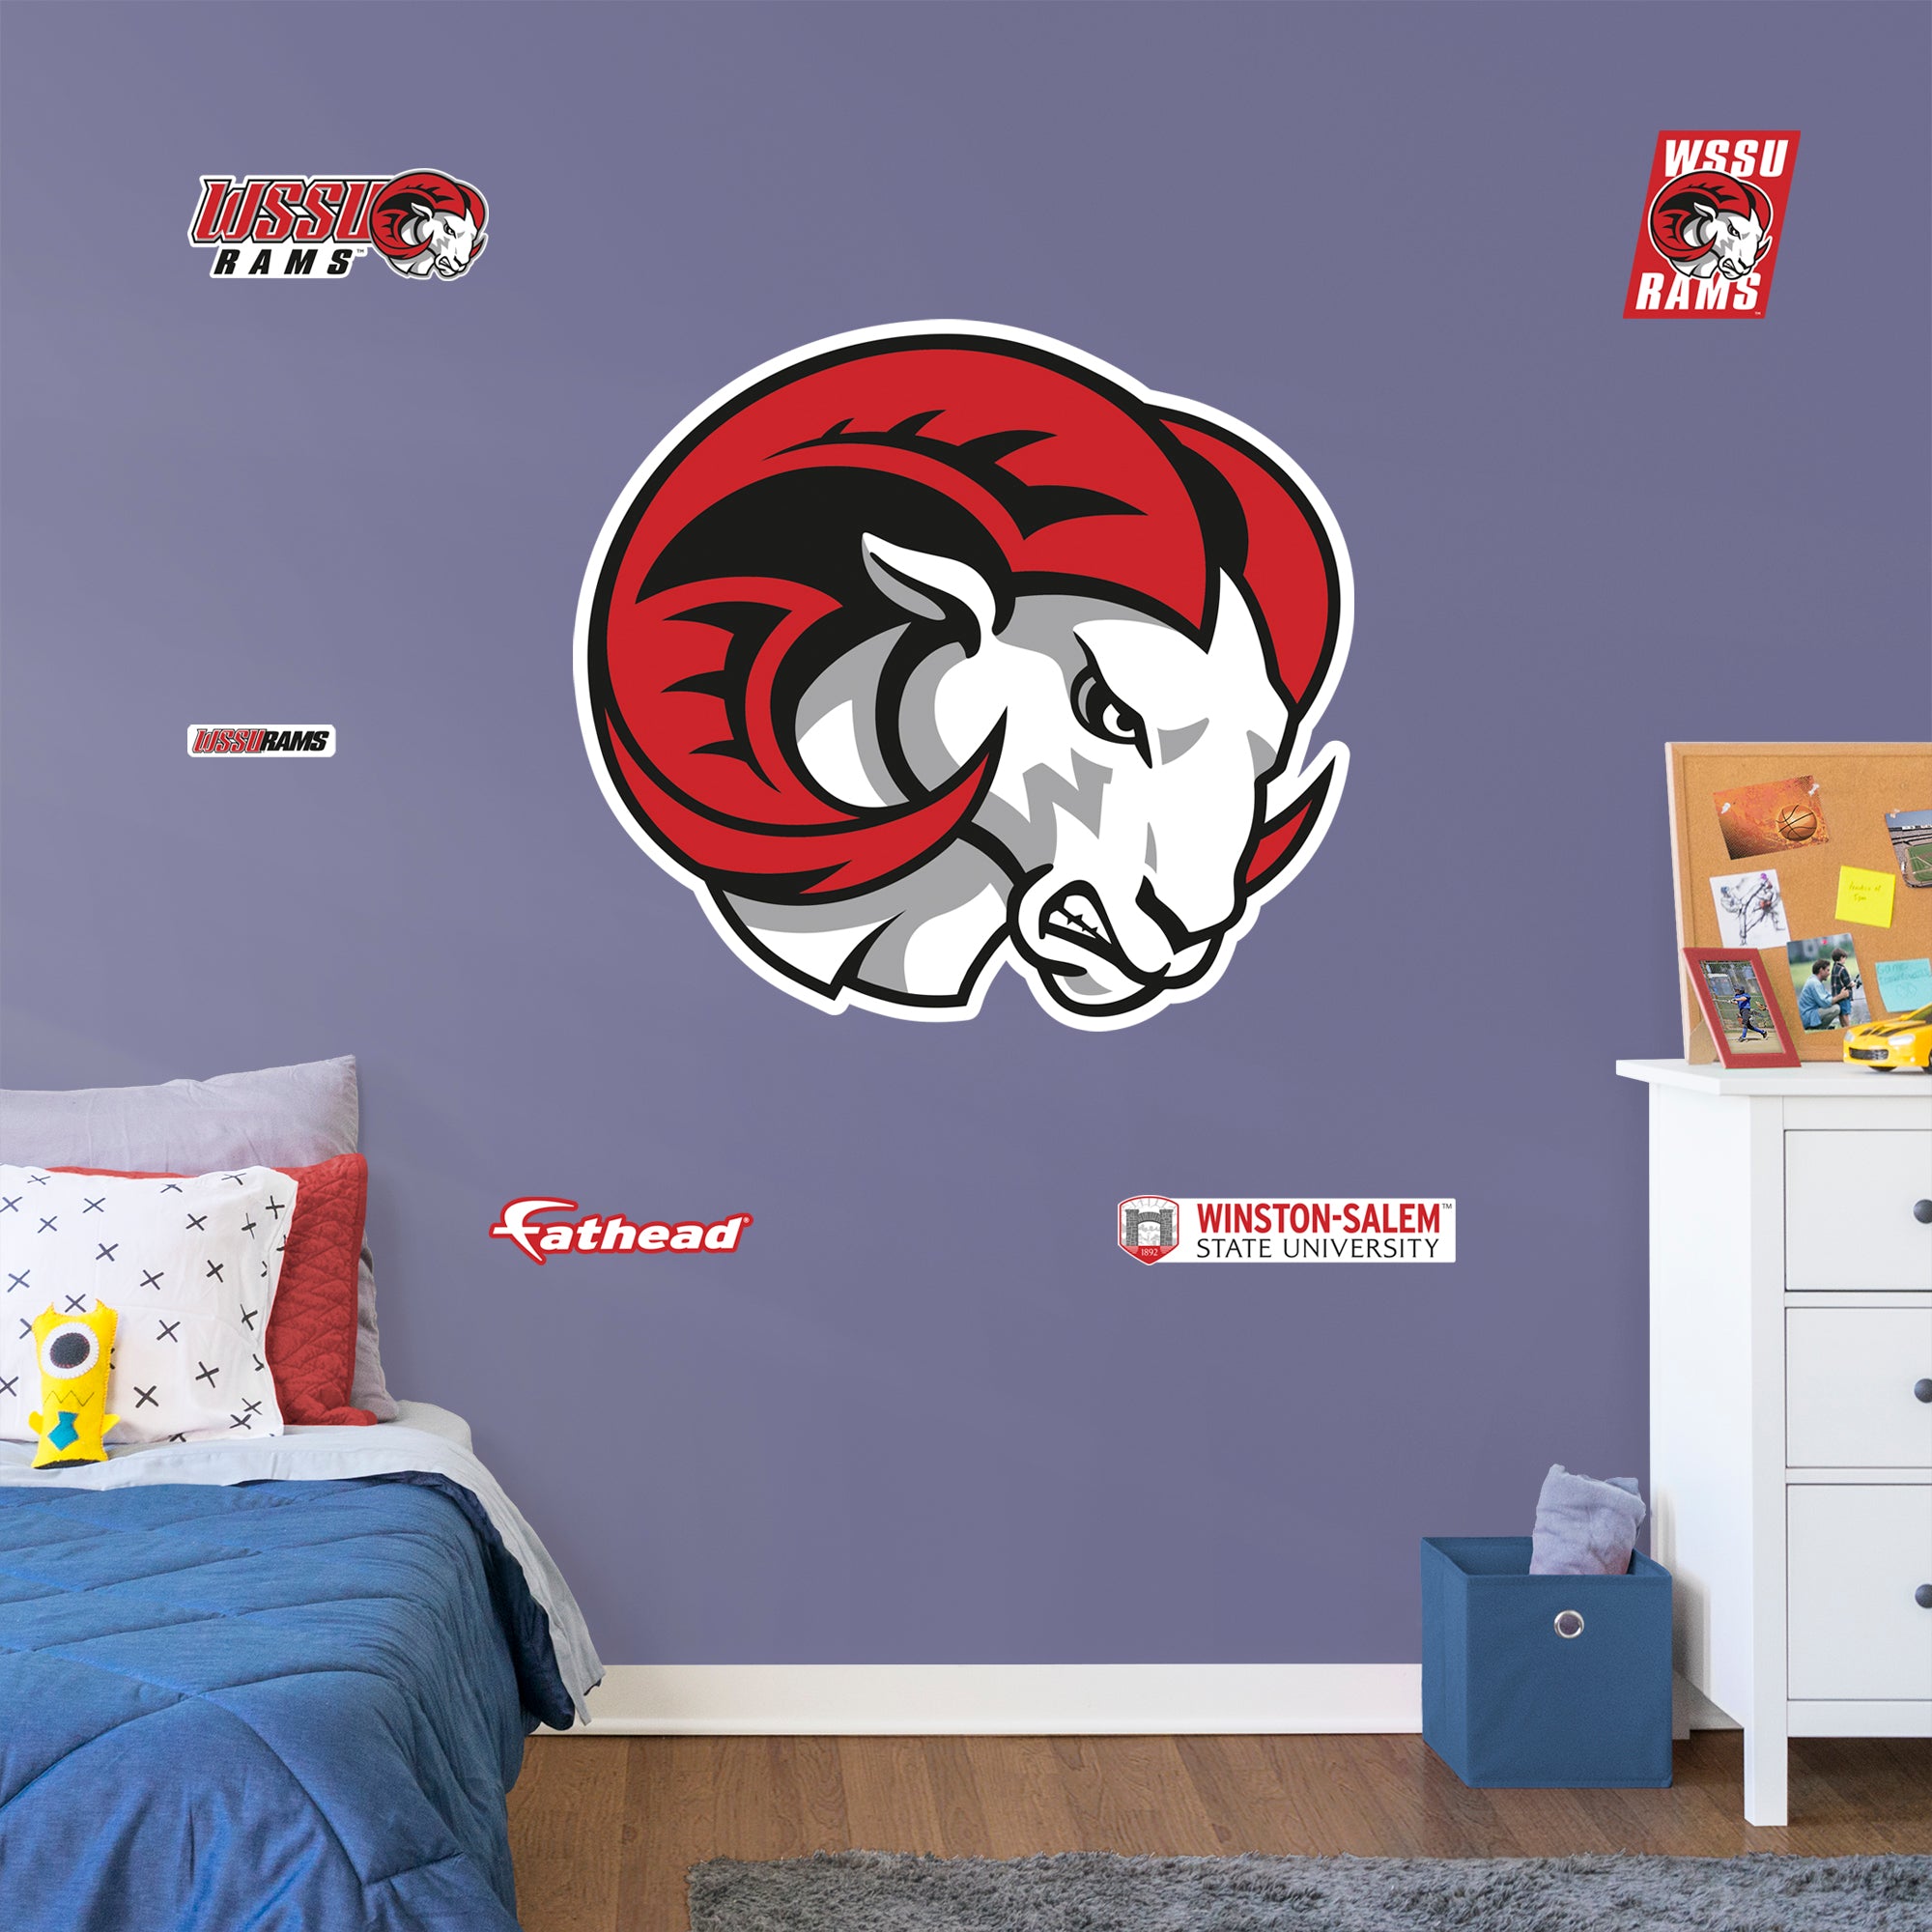 Winston-Salem State University 2020 RealBig - Officially Licensed NCAA Removable Wall Decal Giant Decal (38"W x 42"H) by Fathead